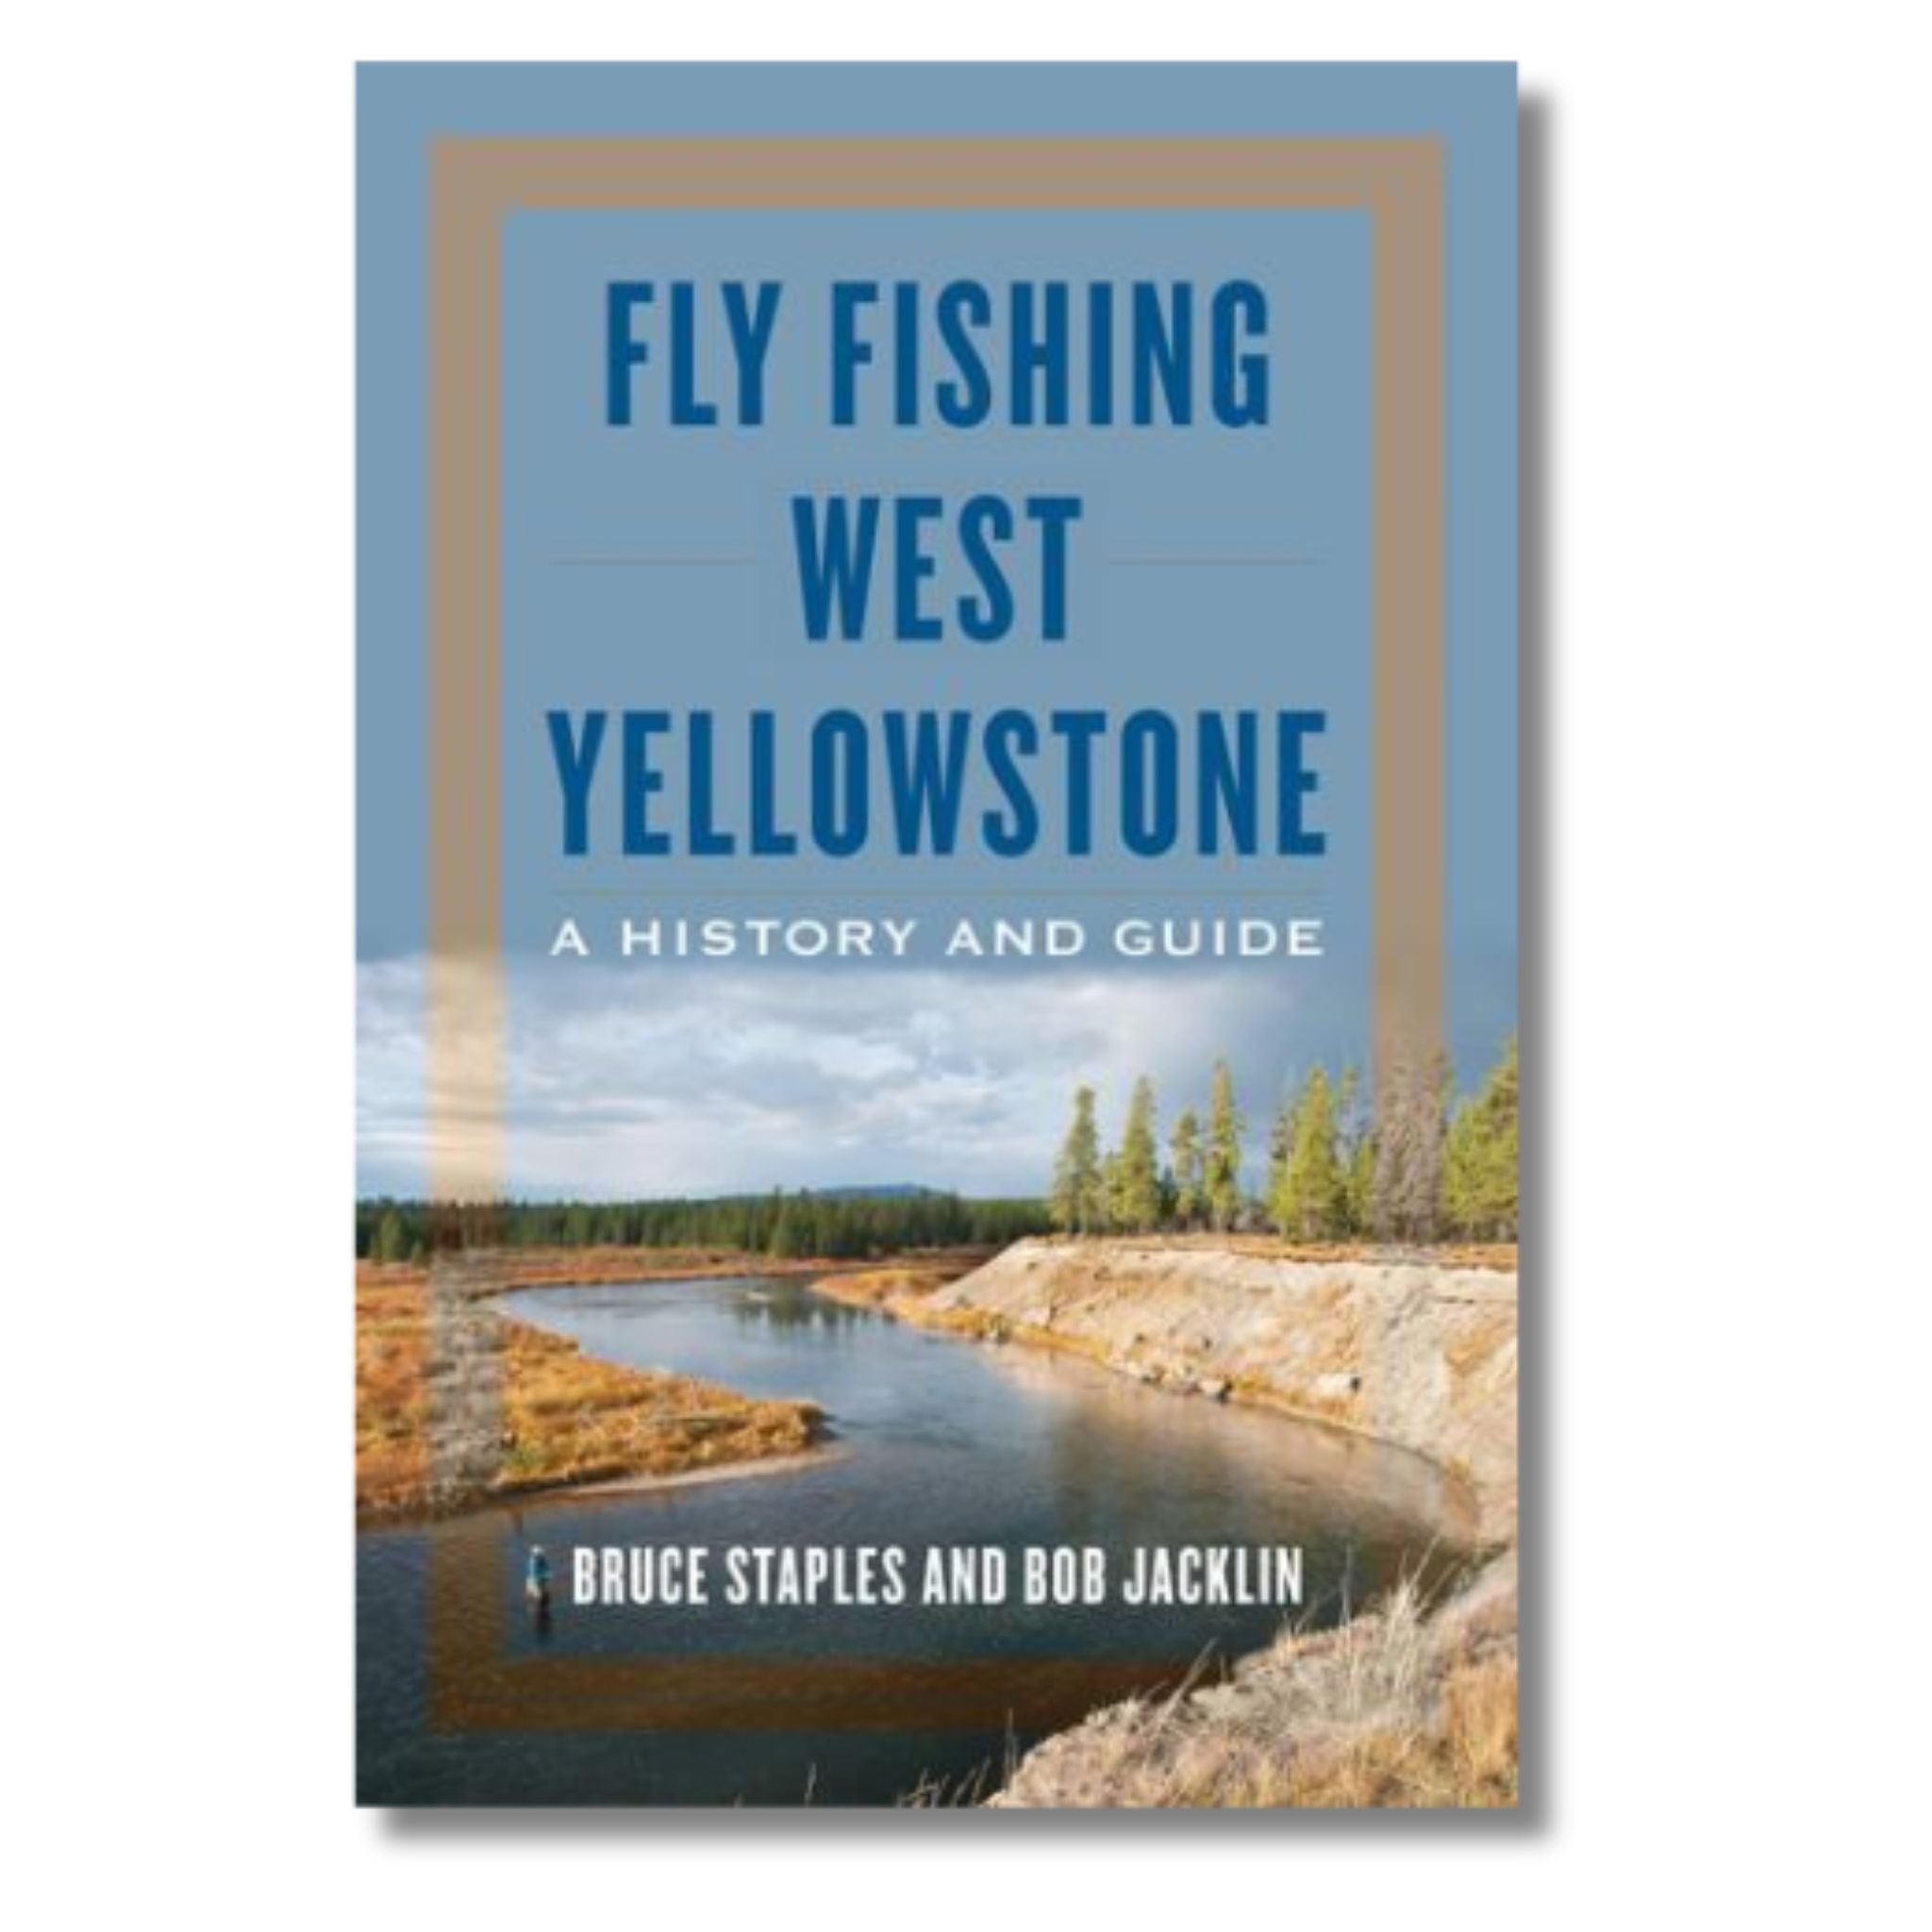 Fly Fishing West Yellowstone: A History & Guide